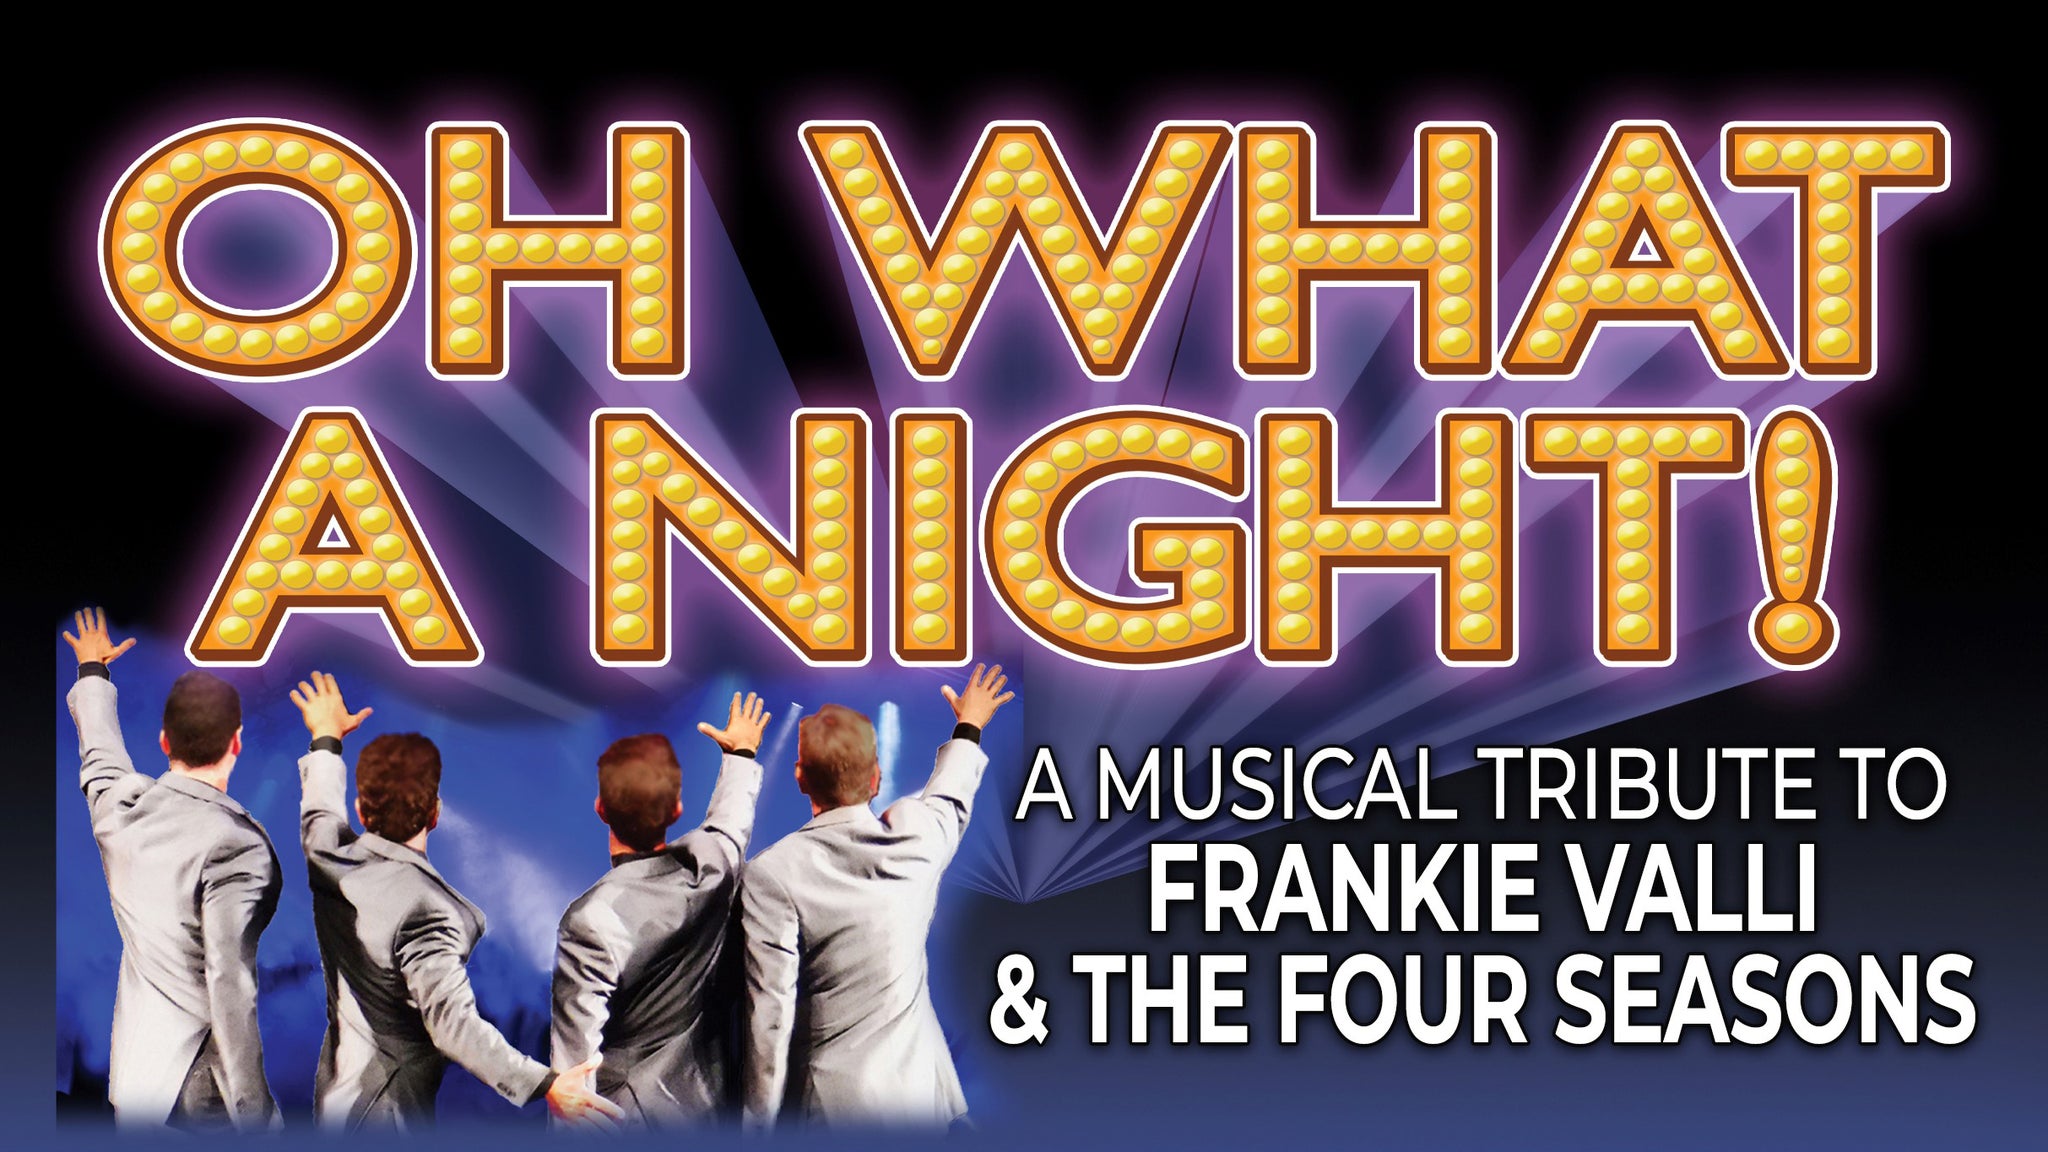 Oh What A Night! Musical Tribute To Frankie Valli & The Four Seasons